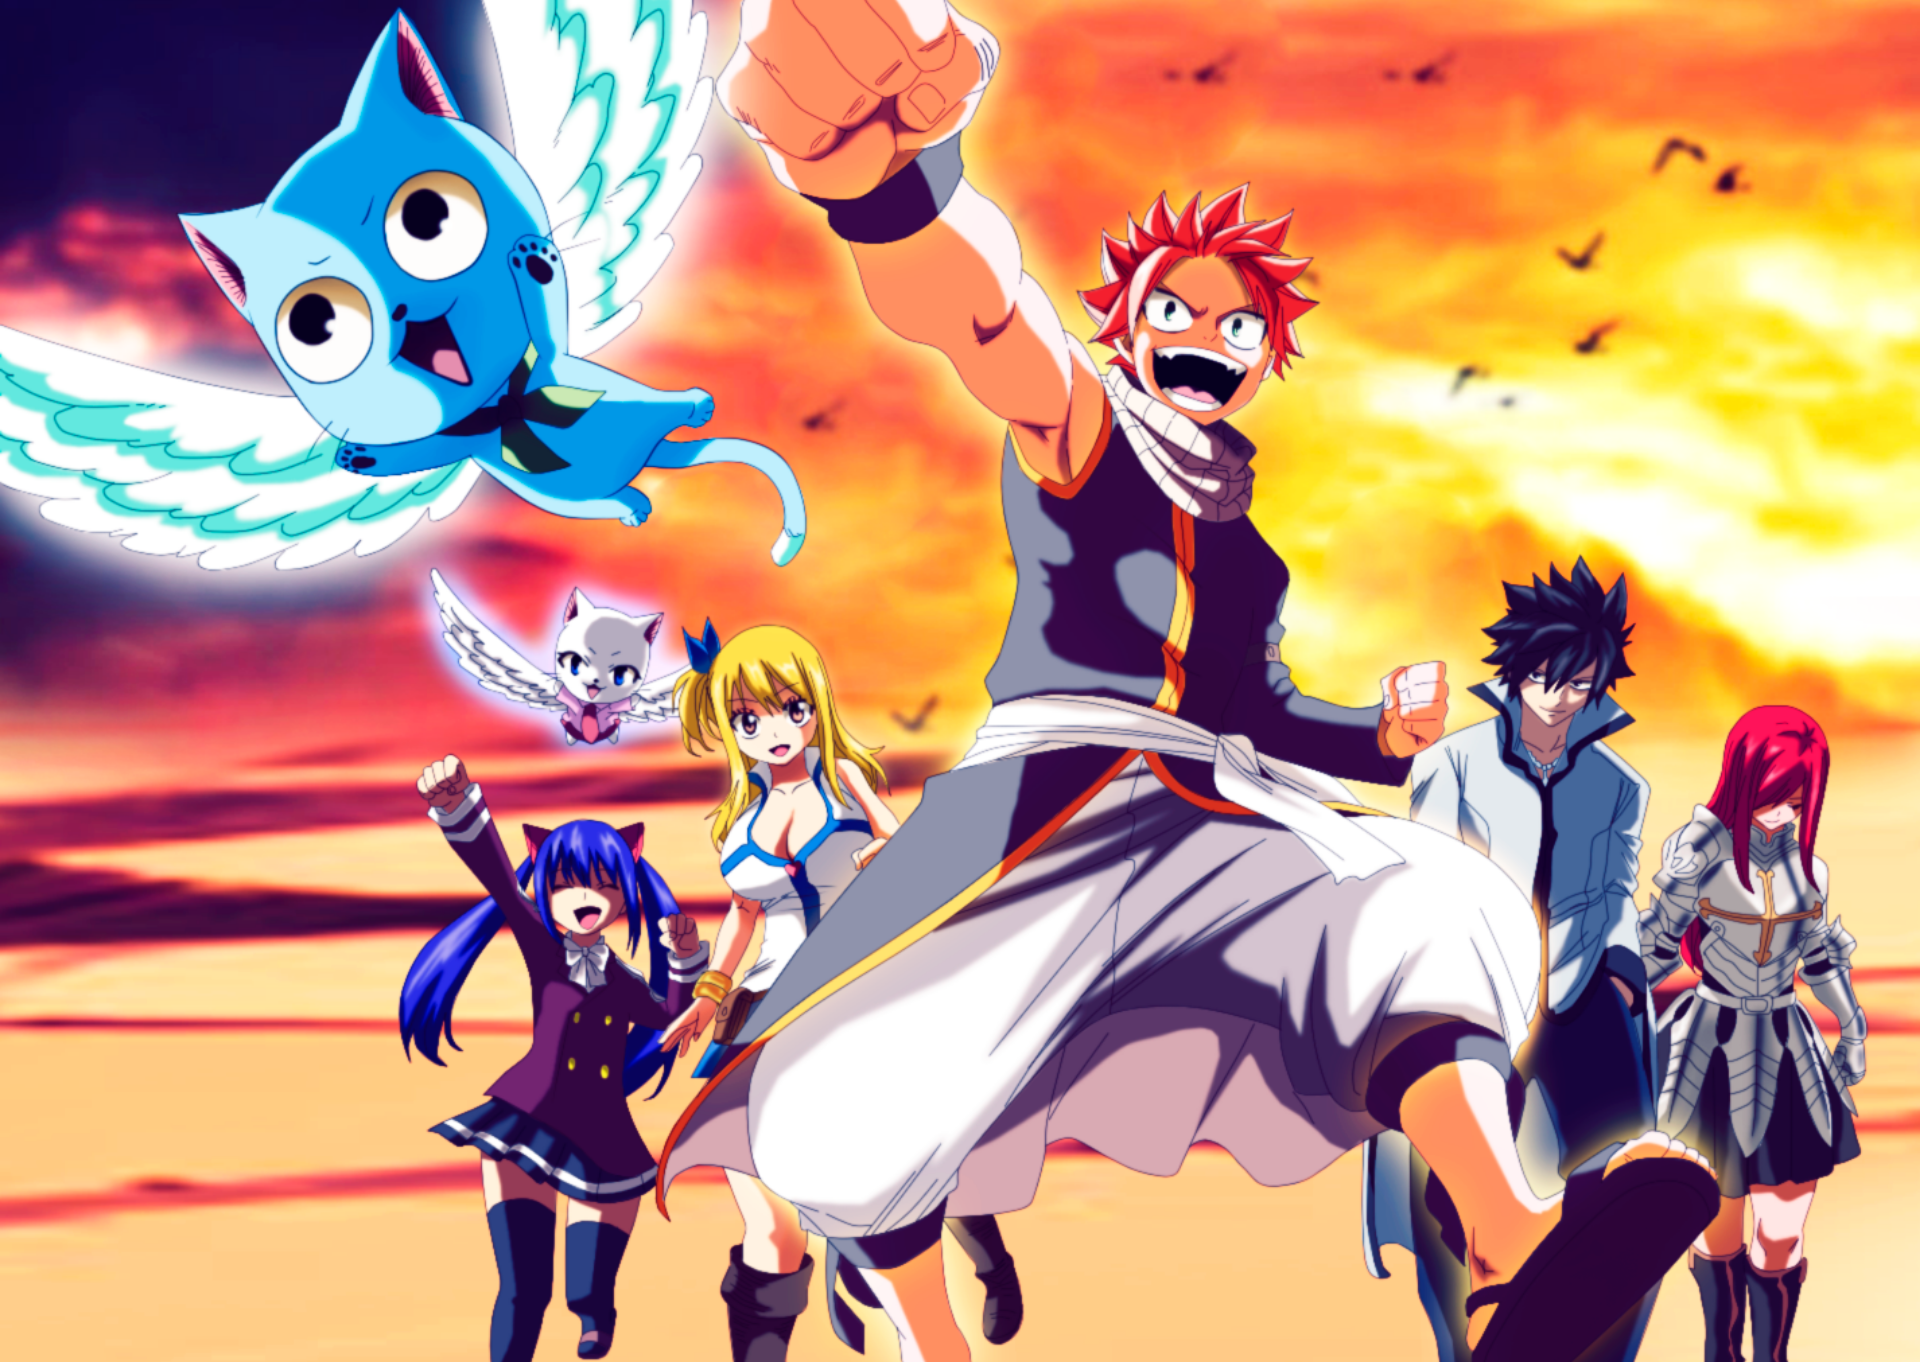 Charles Fairy Tail Erza Scarlet Gray Fullbuster Happy Fairy Tail Lucy Heartfilia Natsu Dragneel Wend 1920x1362